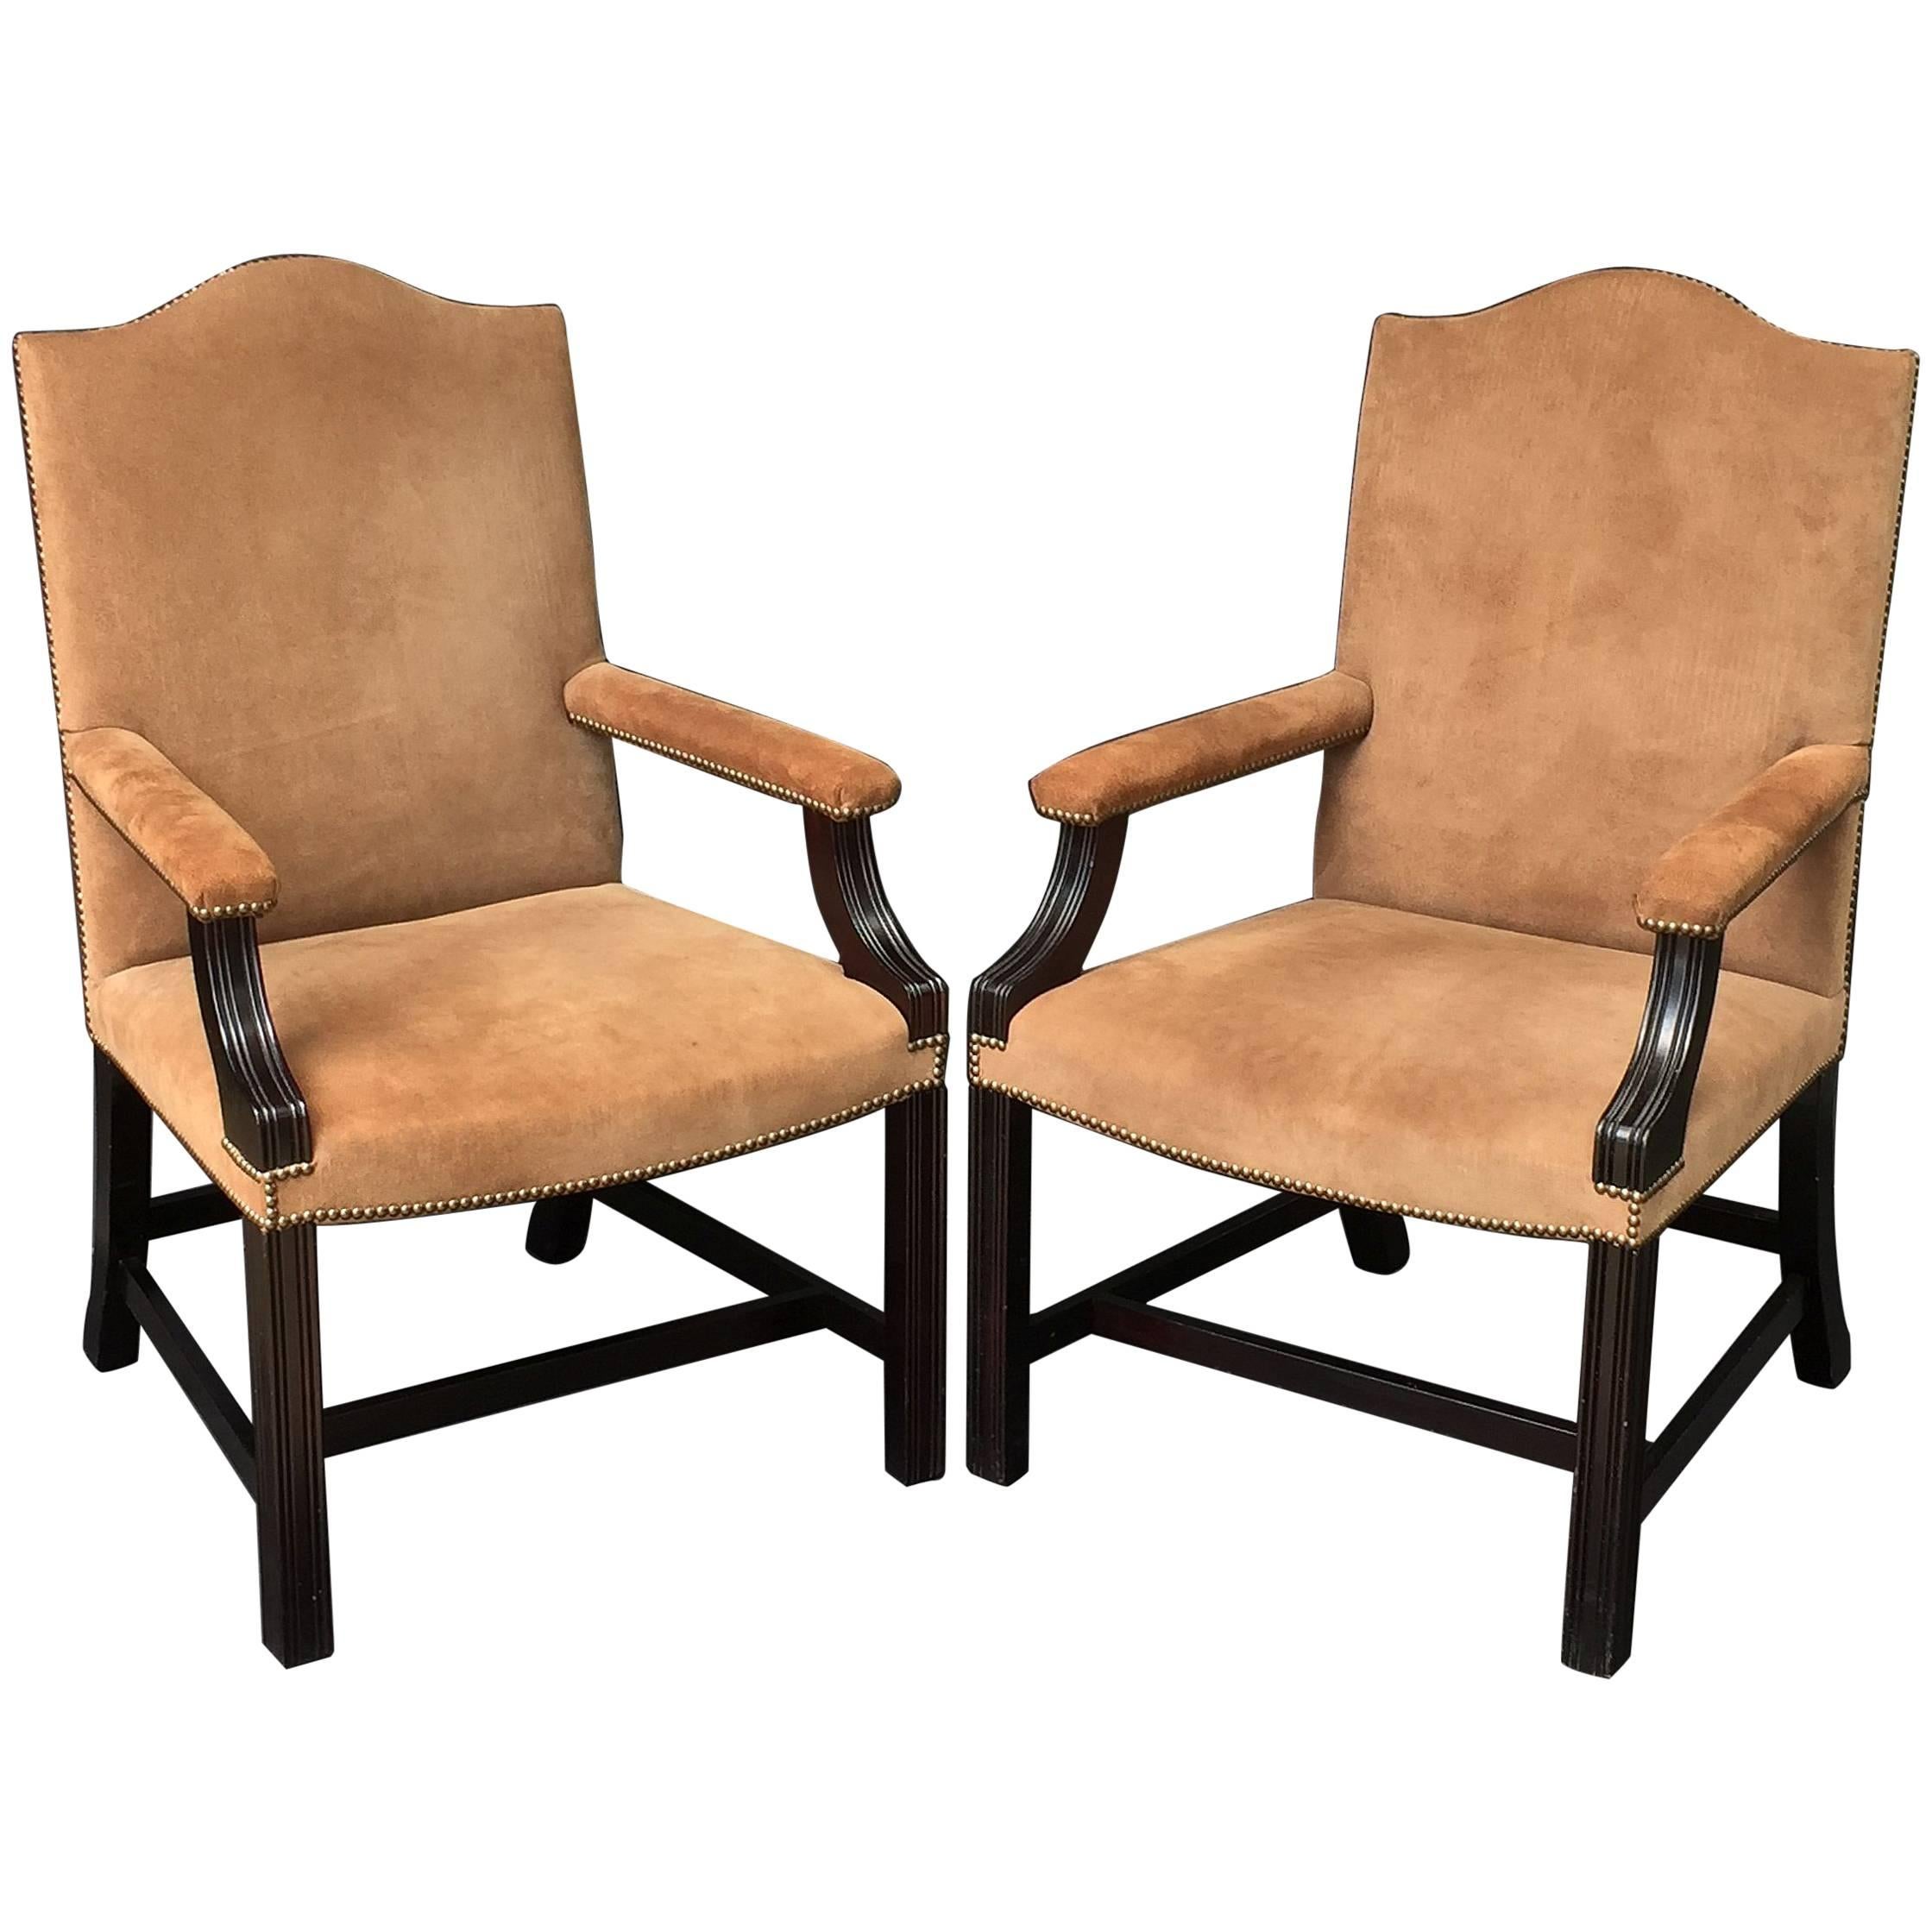 English Library Armchairs with Suede Leather Covers by George Smith